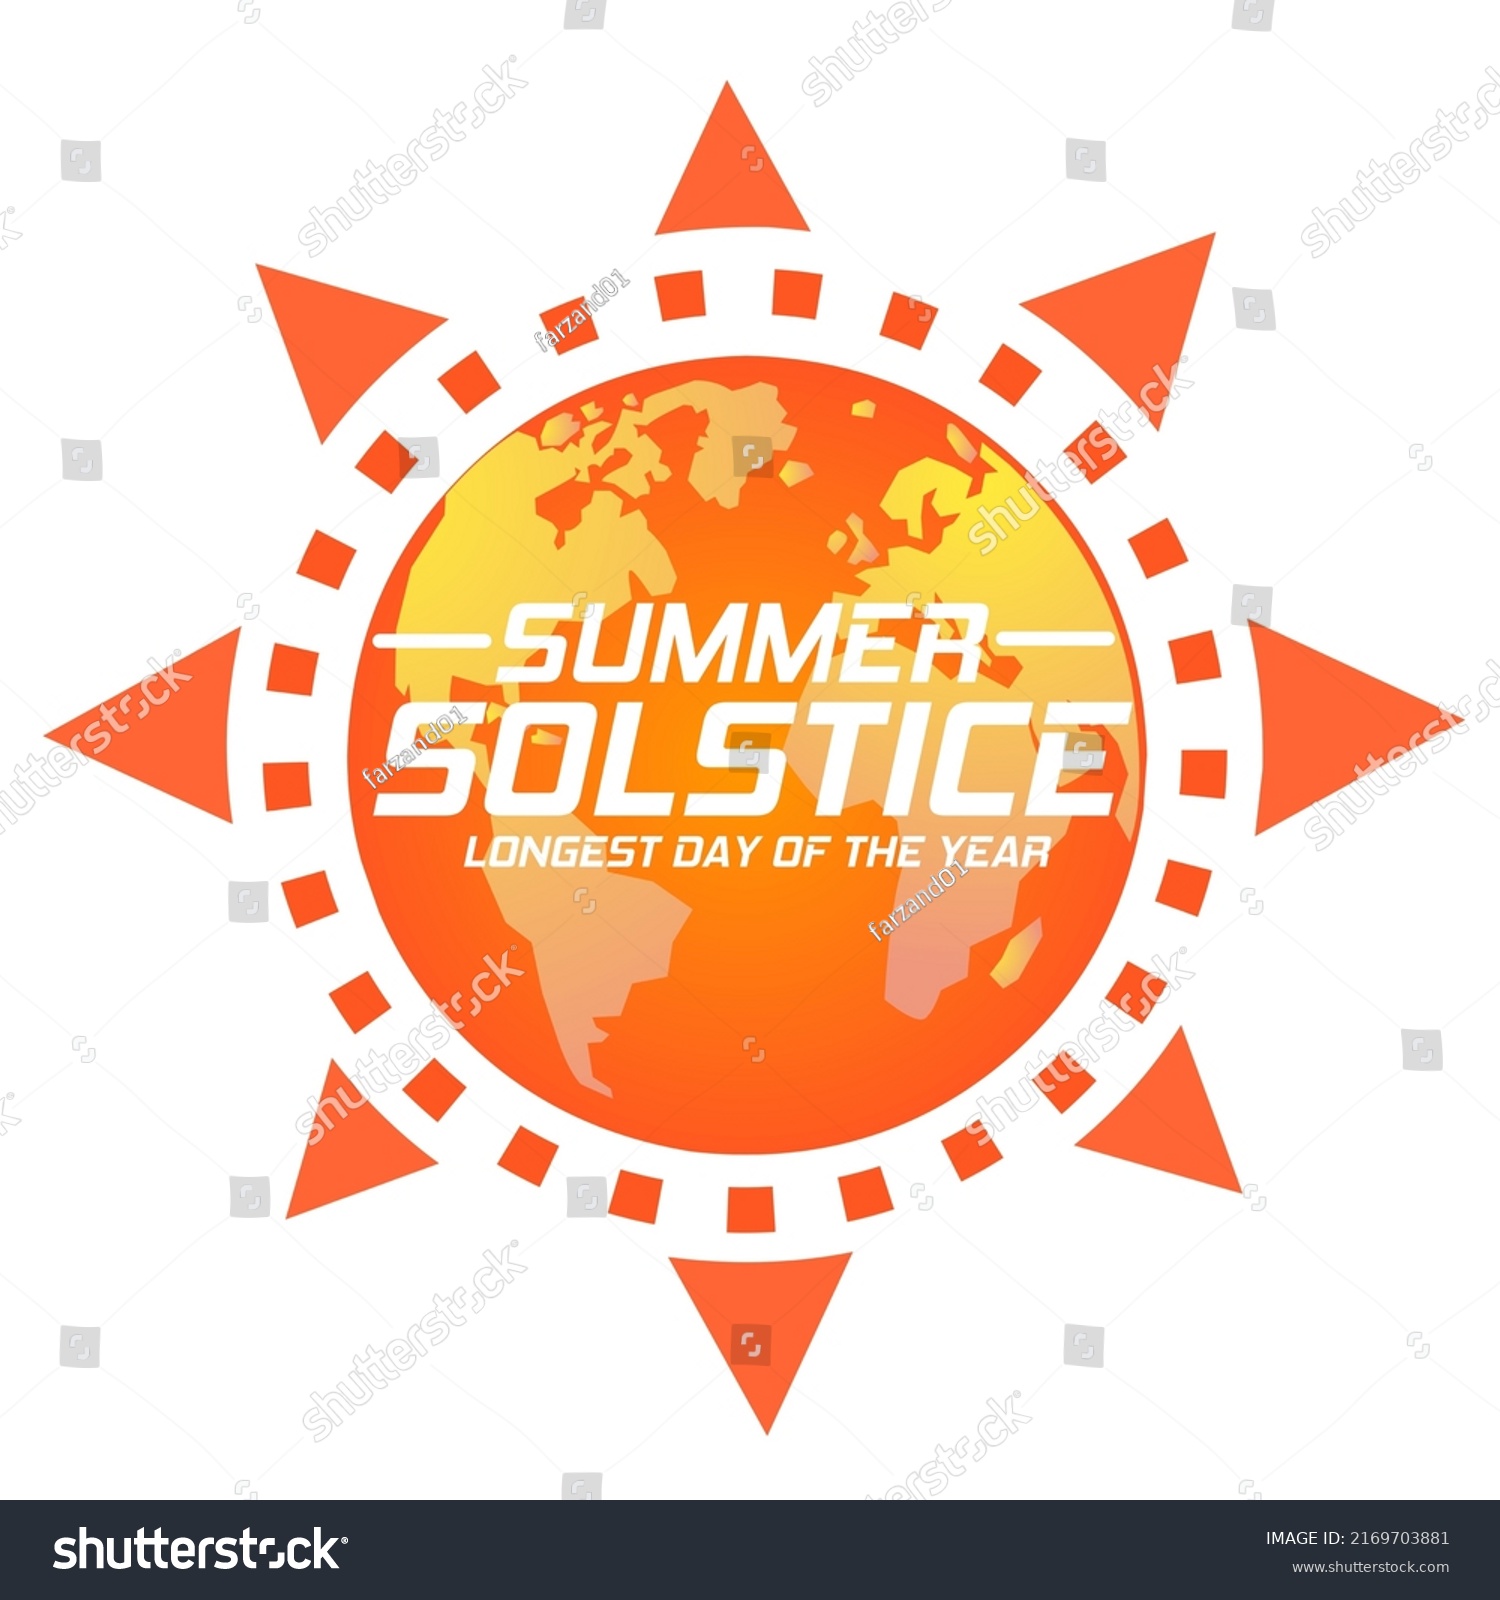 Summer Solstice Longest Day Year Vector Stock Vector (Royalty Free